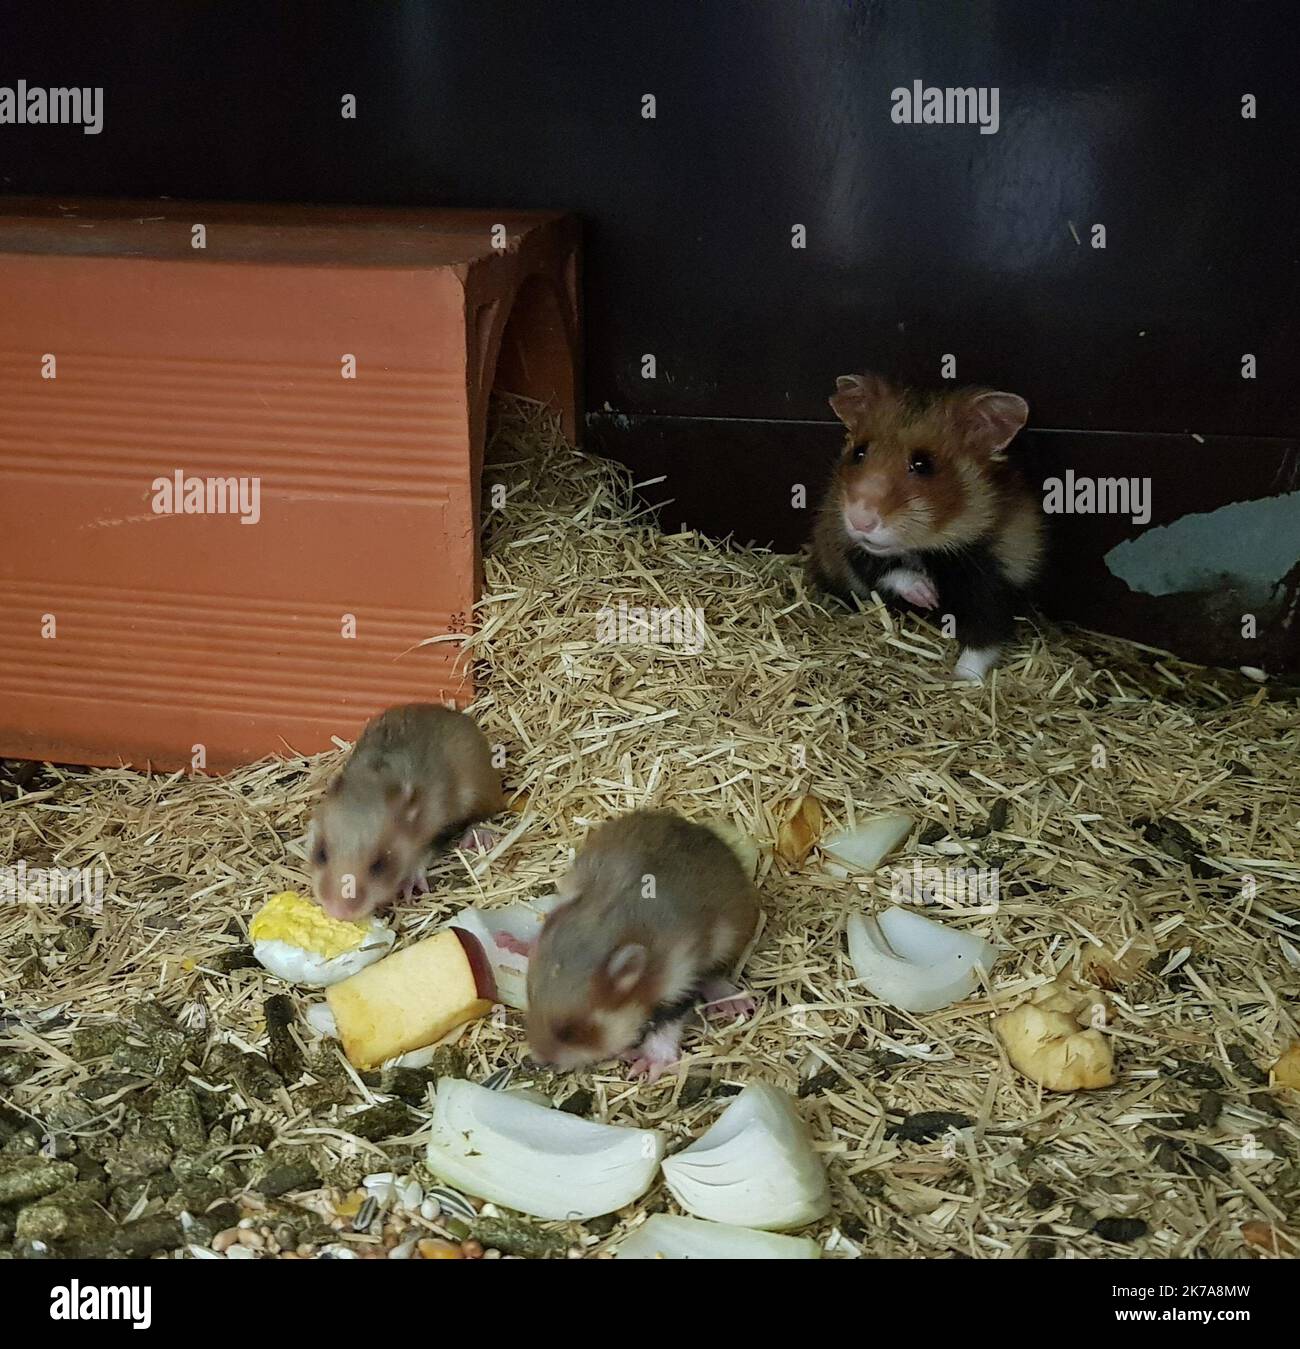 ©PHOTOPQR/DNA/Gregoire GAUCHET ; Jungholtz ; 20/07/2020 ; l'elevage de grand hamster géré par Sauvegarde Faune Sauvage à Jungholtz Jungholtz, France, july 7th 2020 - The Alsace hamster classified as 'critically endangered' The Alsatian hamster was already on the International Union for the Conservation of Nature (IUCN) red list as 'endangered'. Despite local protection efforts, in the eyes of this organization, it is becoming “critical danger”.  Stock Photo